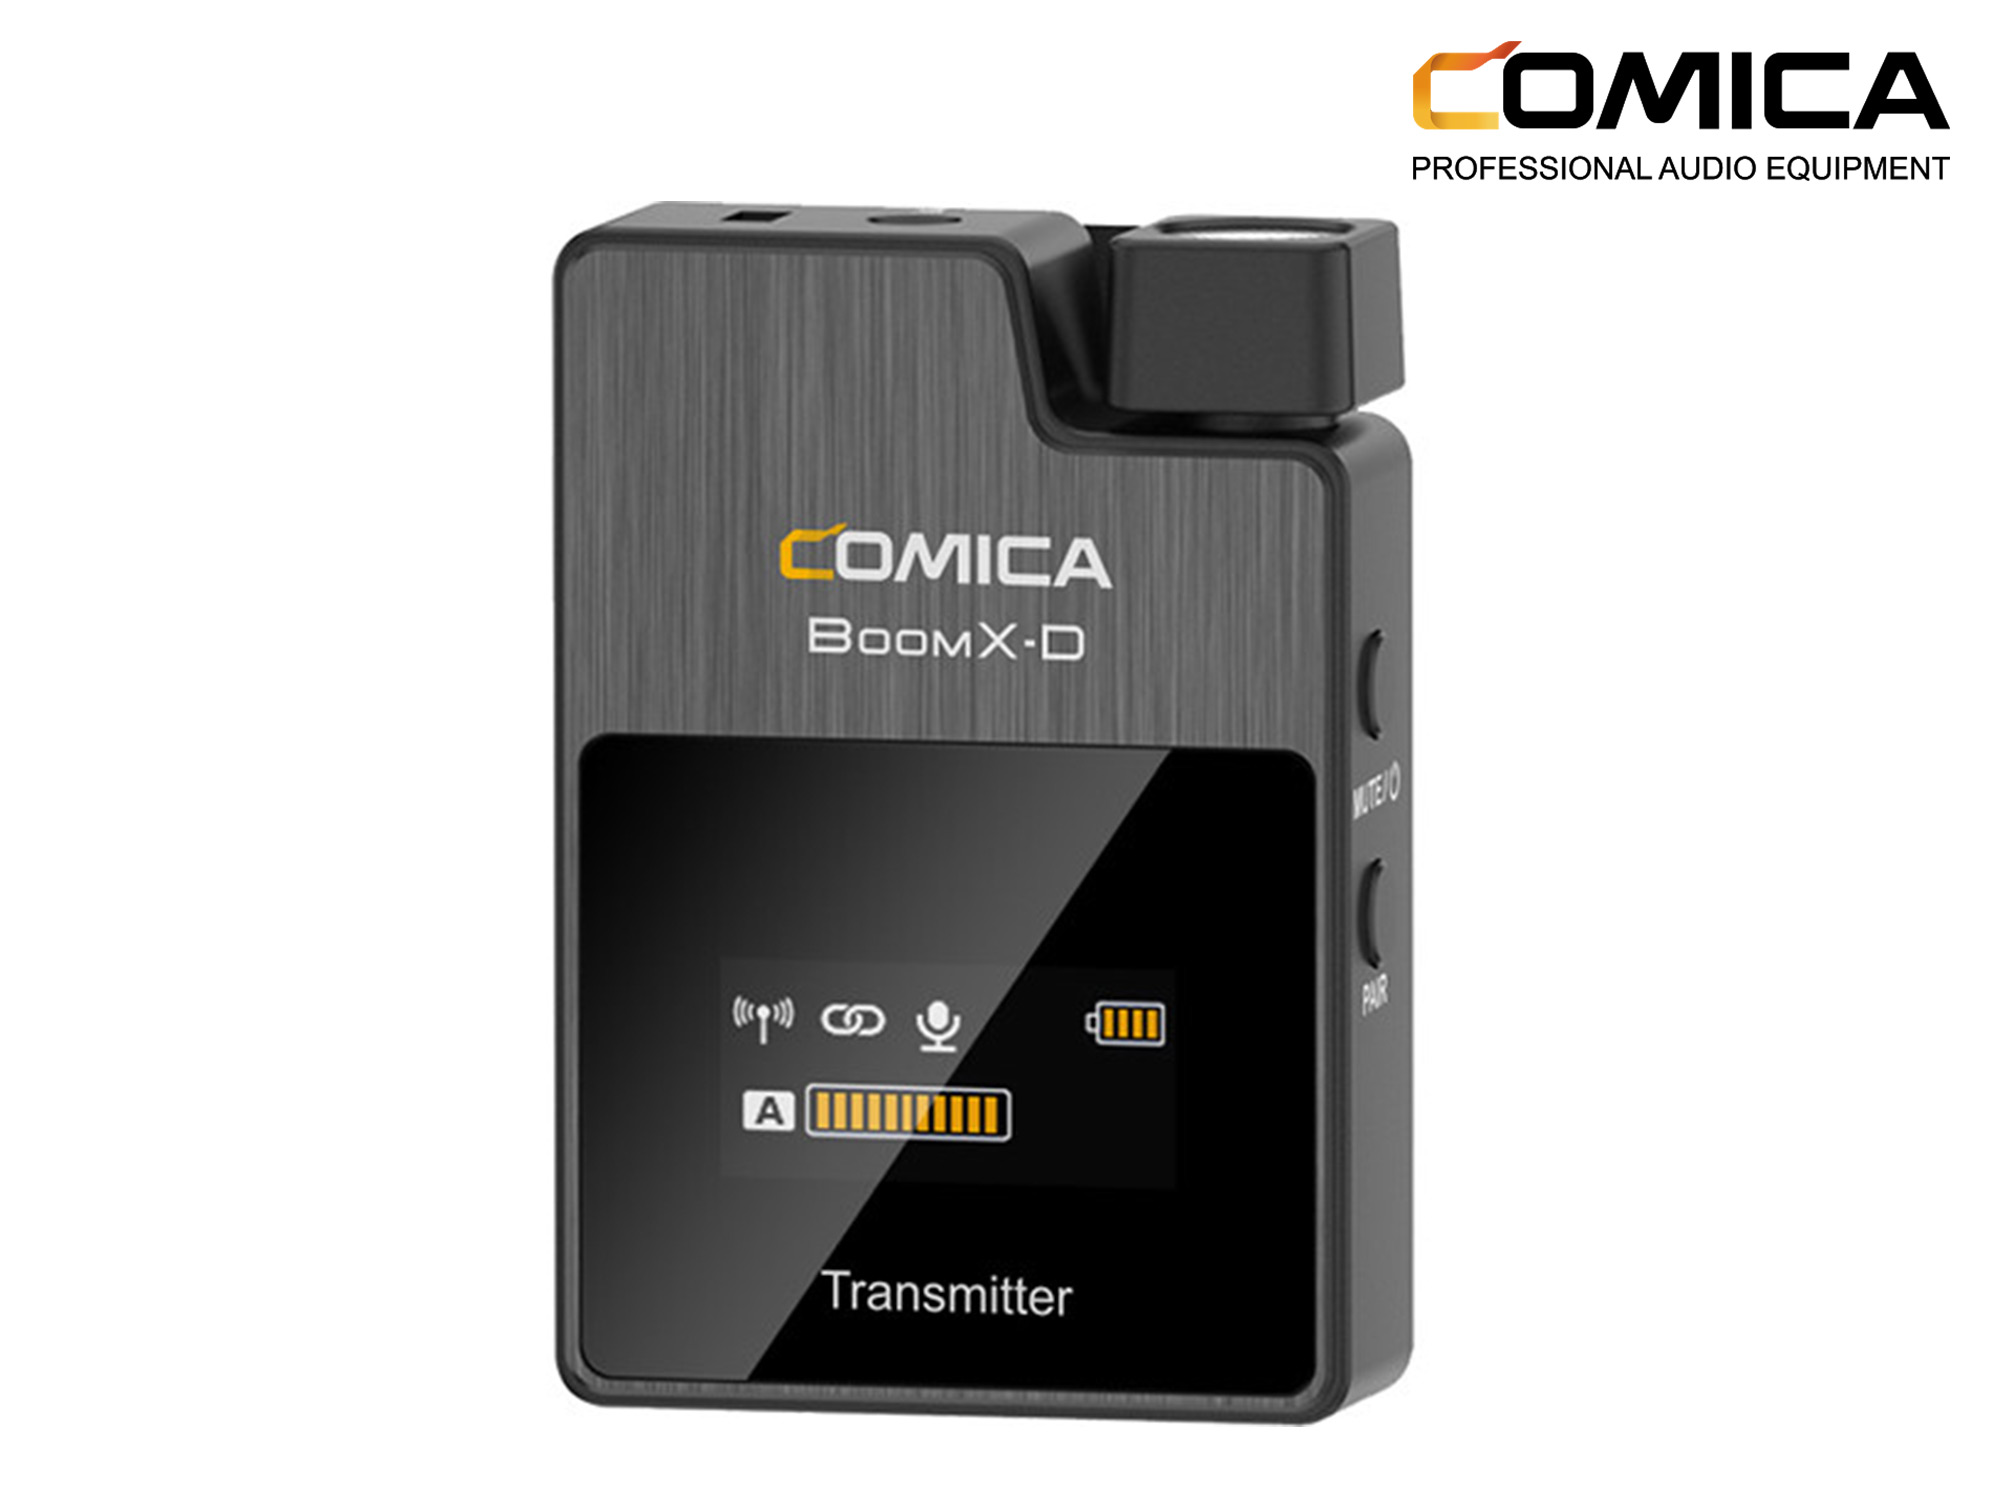 Comica BoomX-D UC1 Ultracompact Digital Wireless Microphone System for Android Smartphones (2.4 GHz)